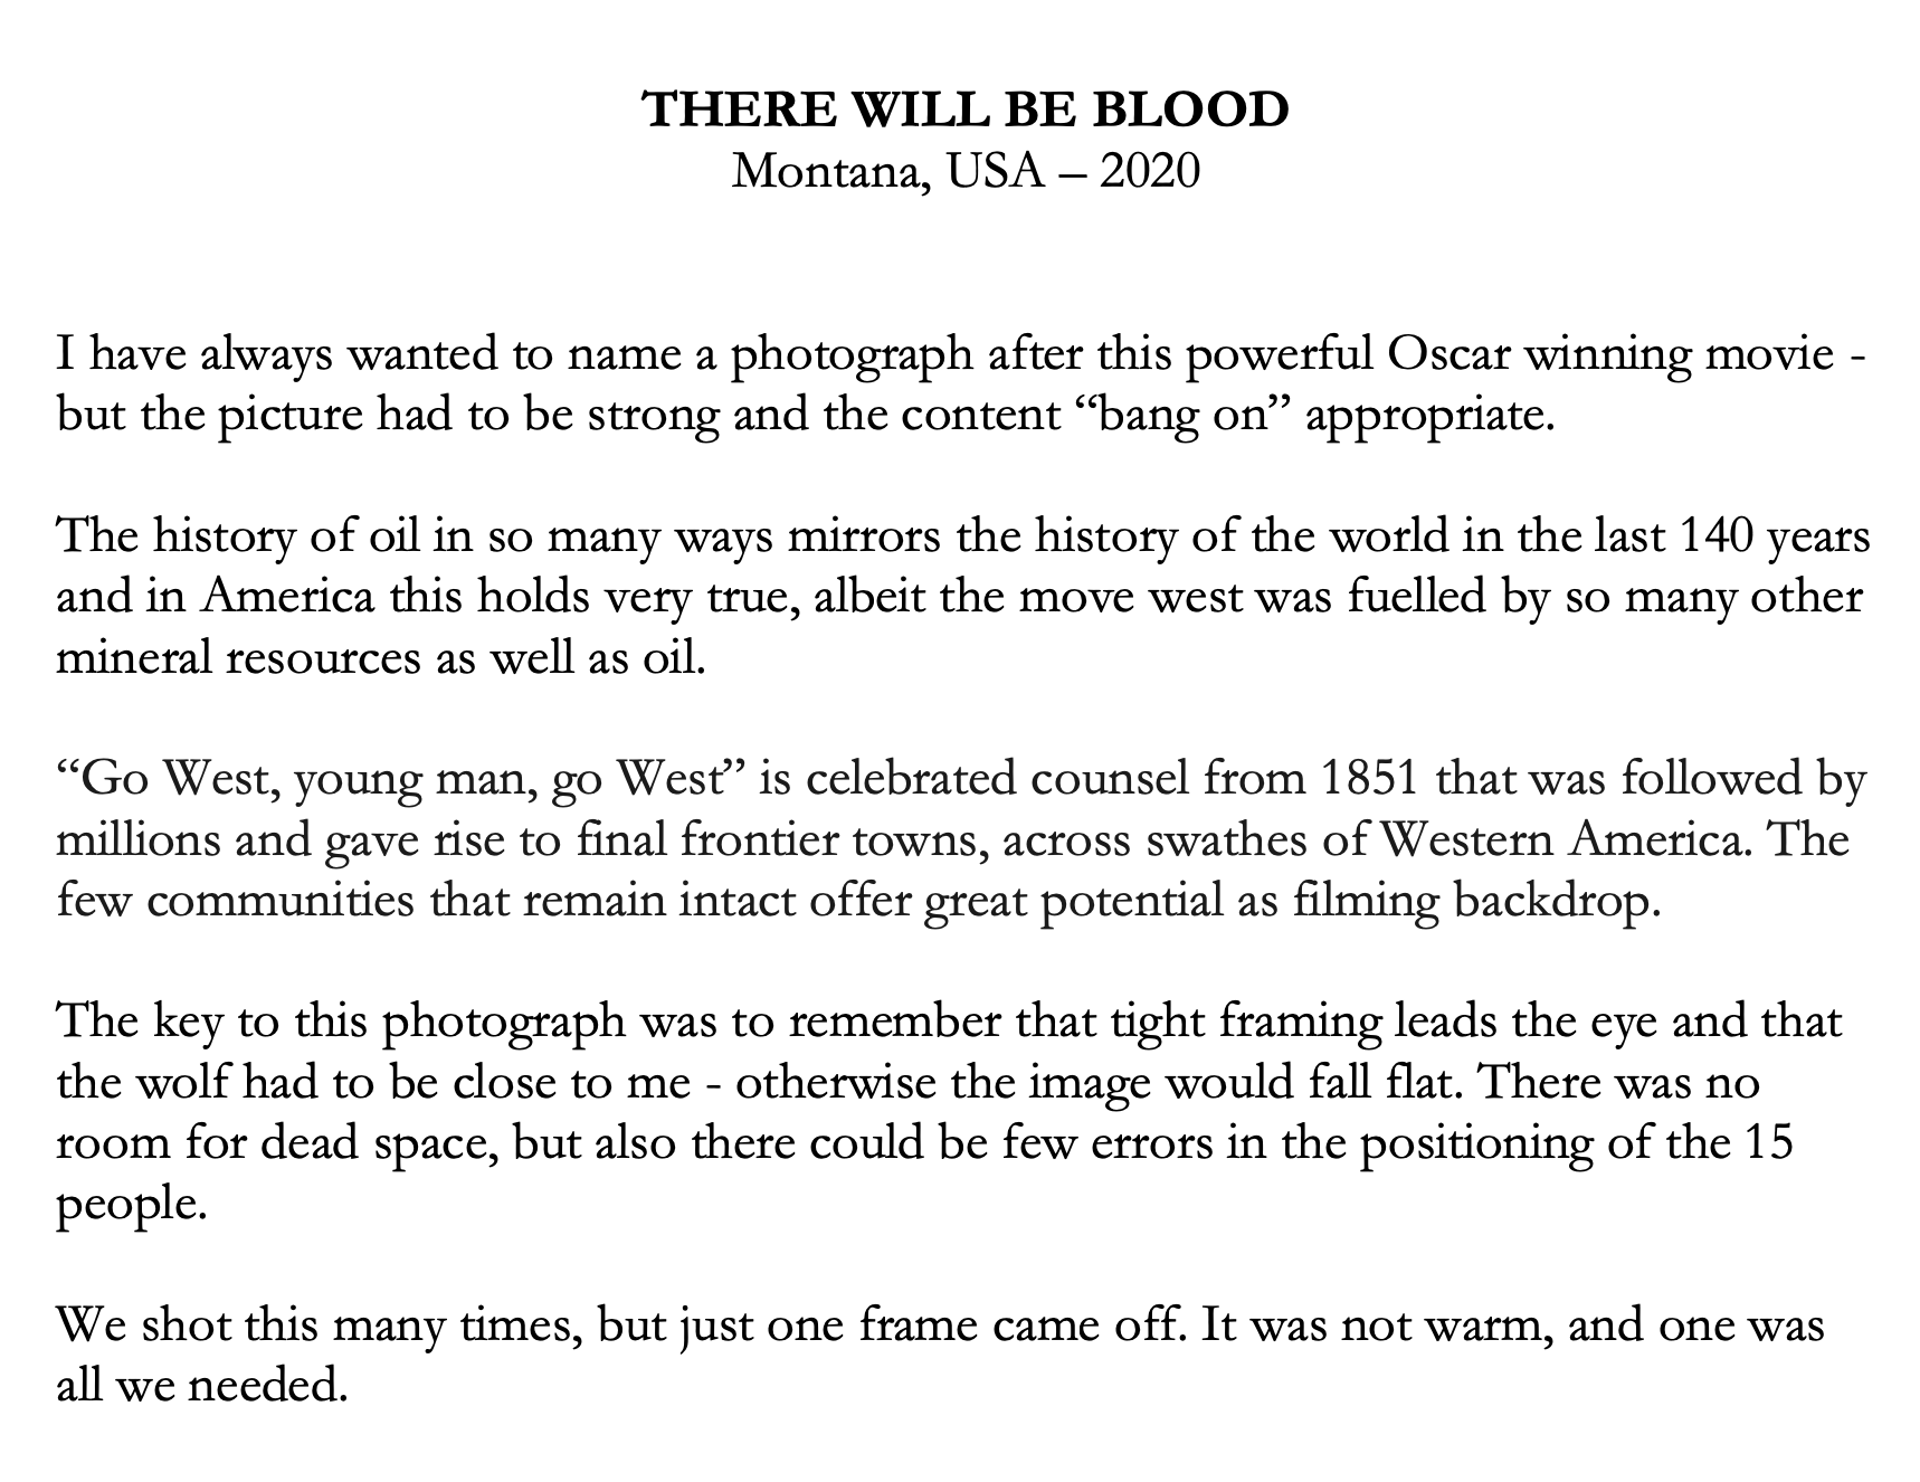 There Will Be Blood by David Yarrow